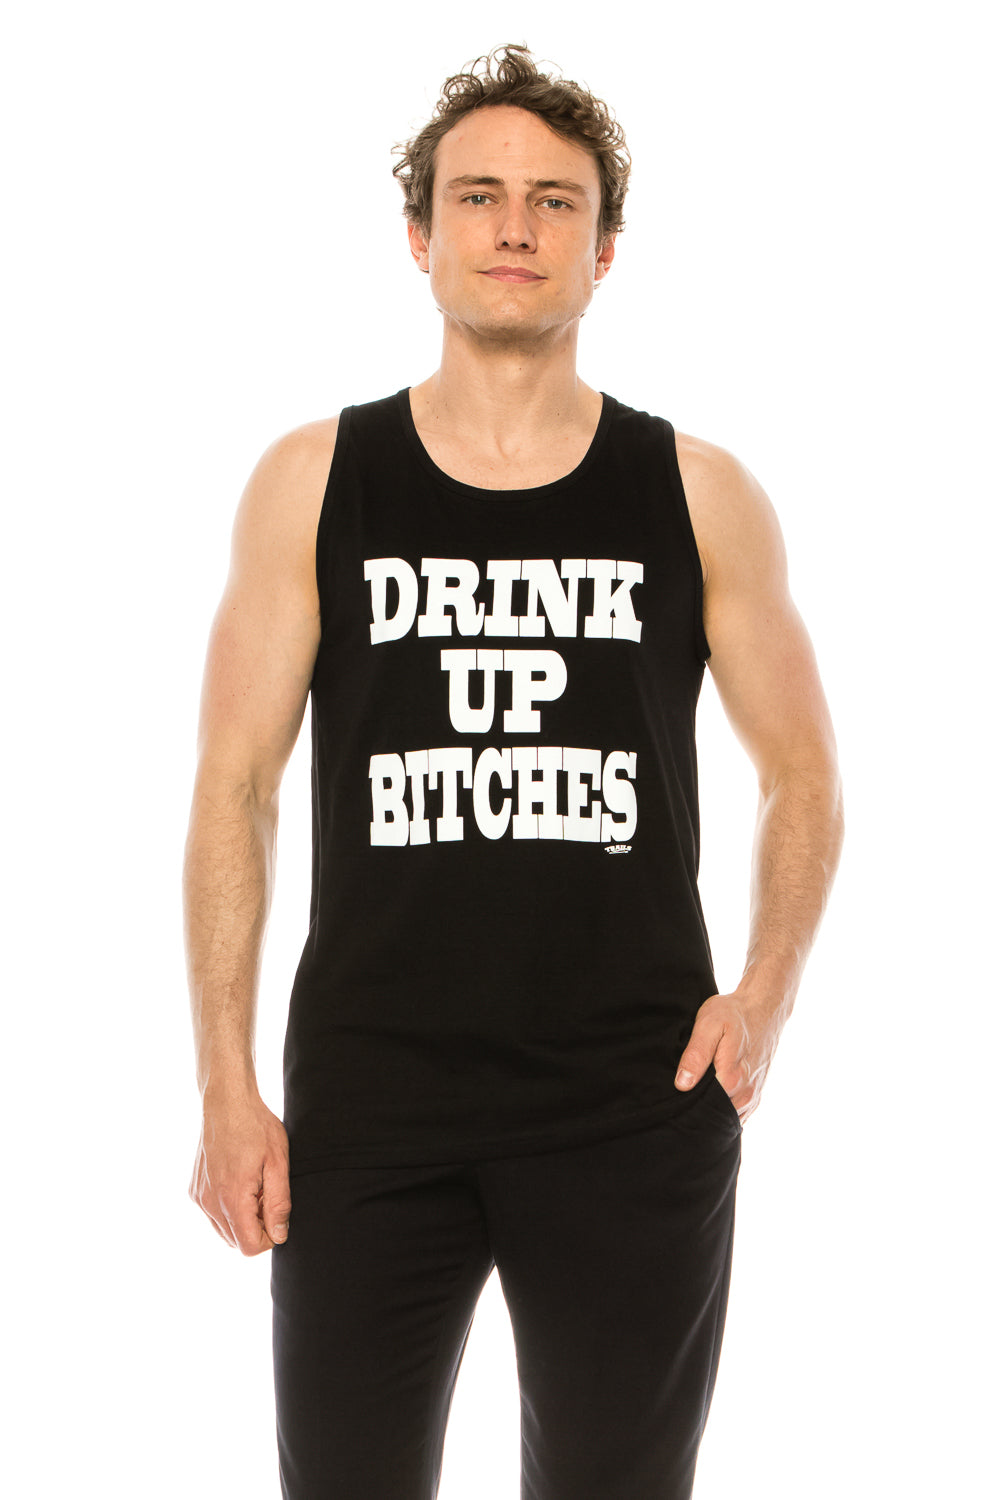 DRINK UP BITCHES MEN'S TANK - Trailsclothing.com